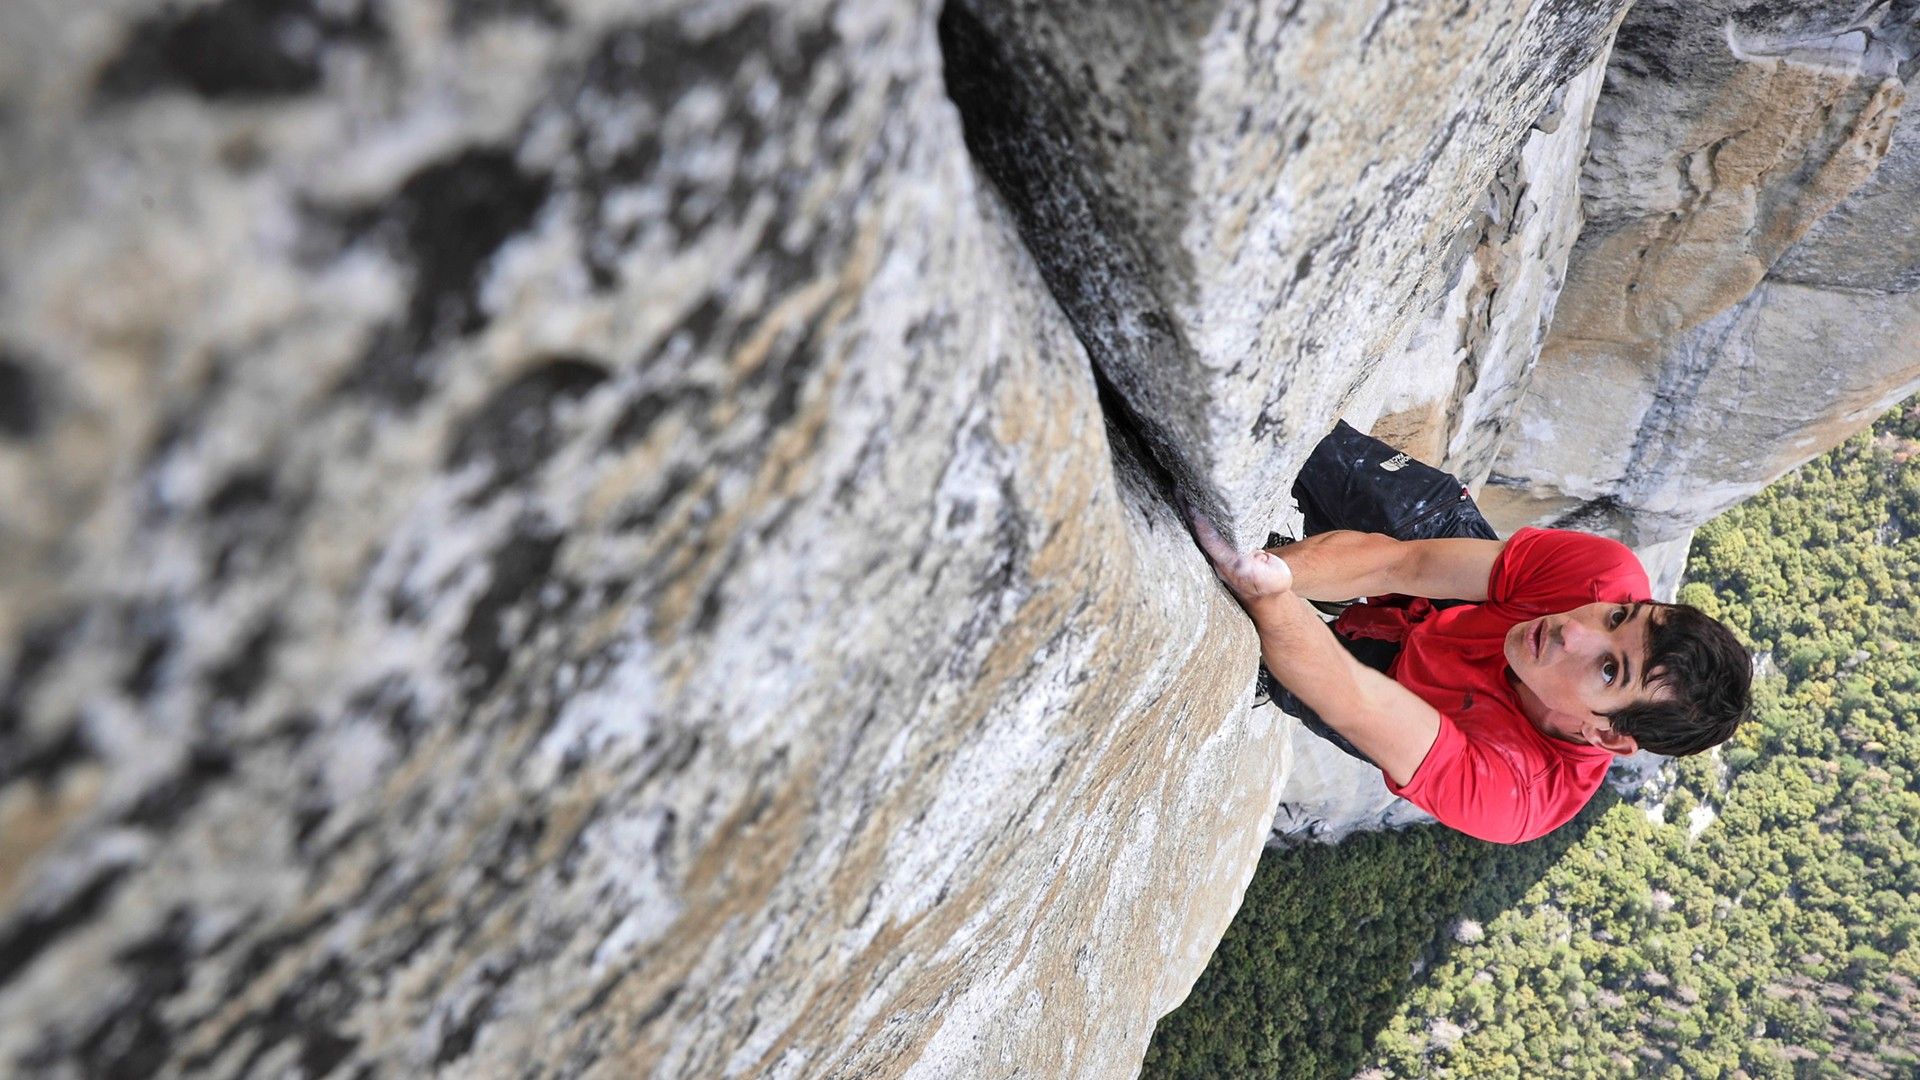 Exclusive: Climber Completes the Most Dangerous Rope